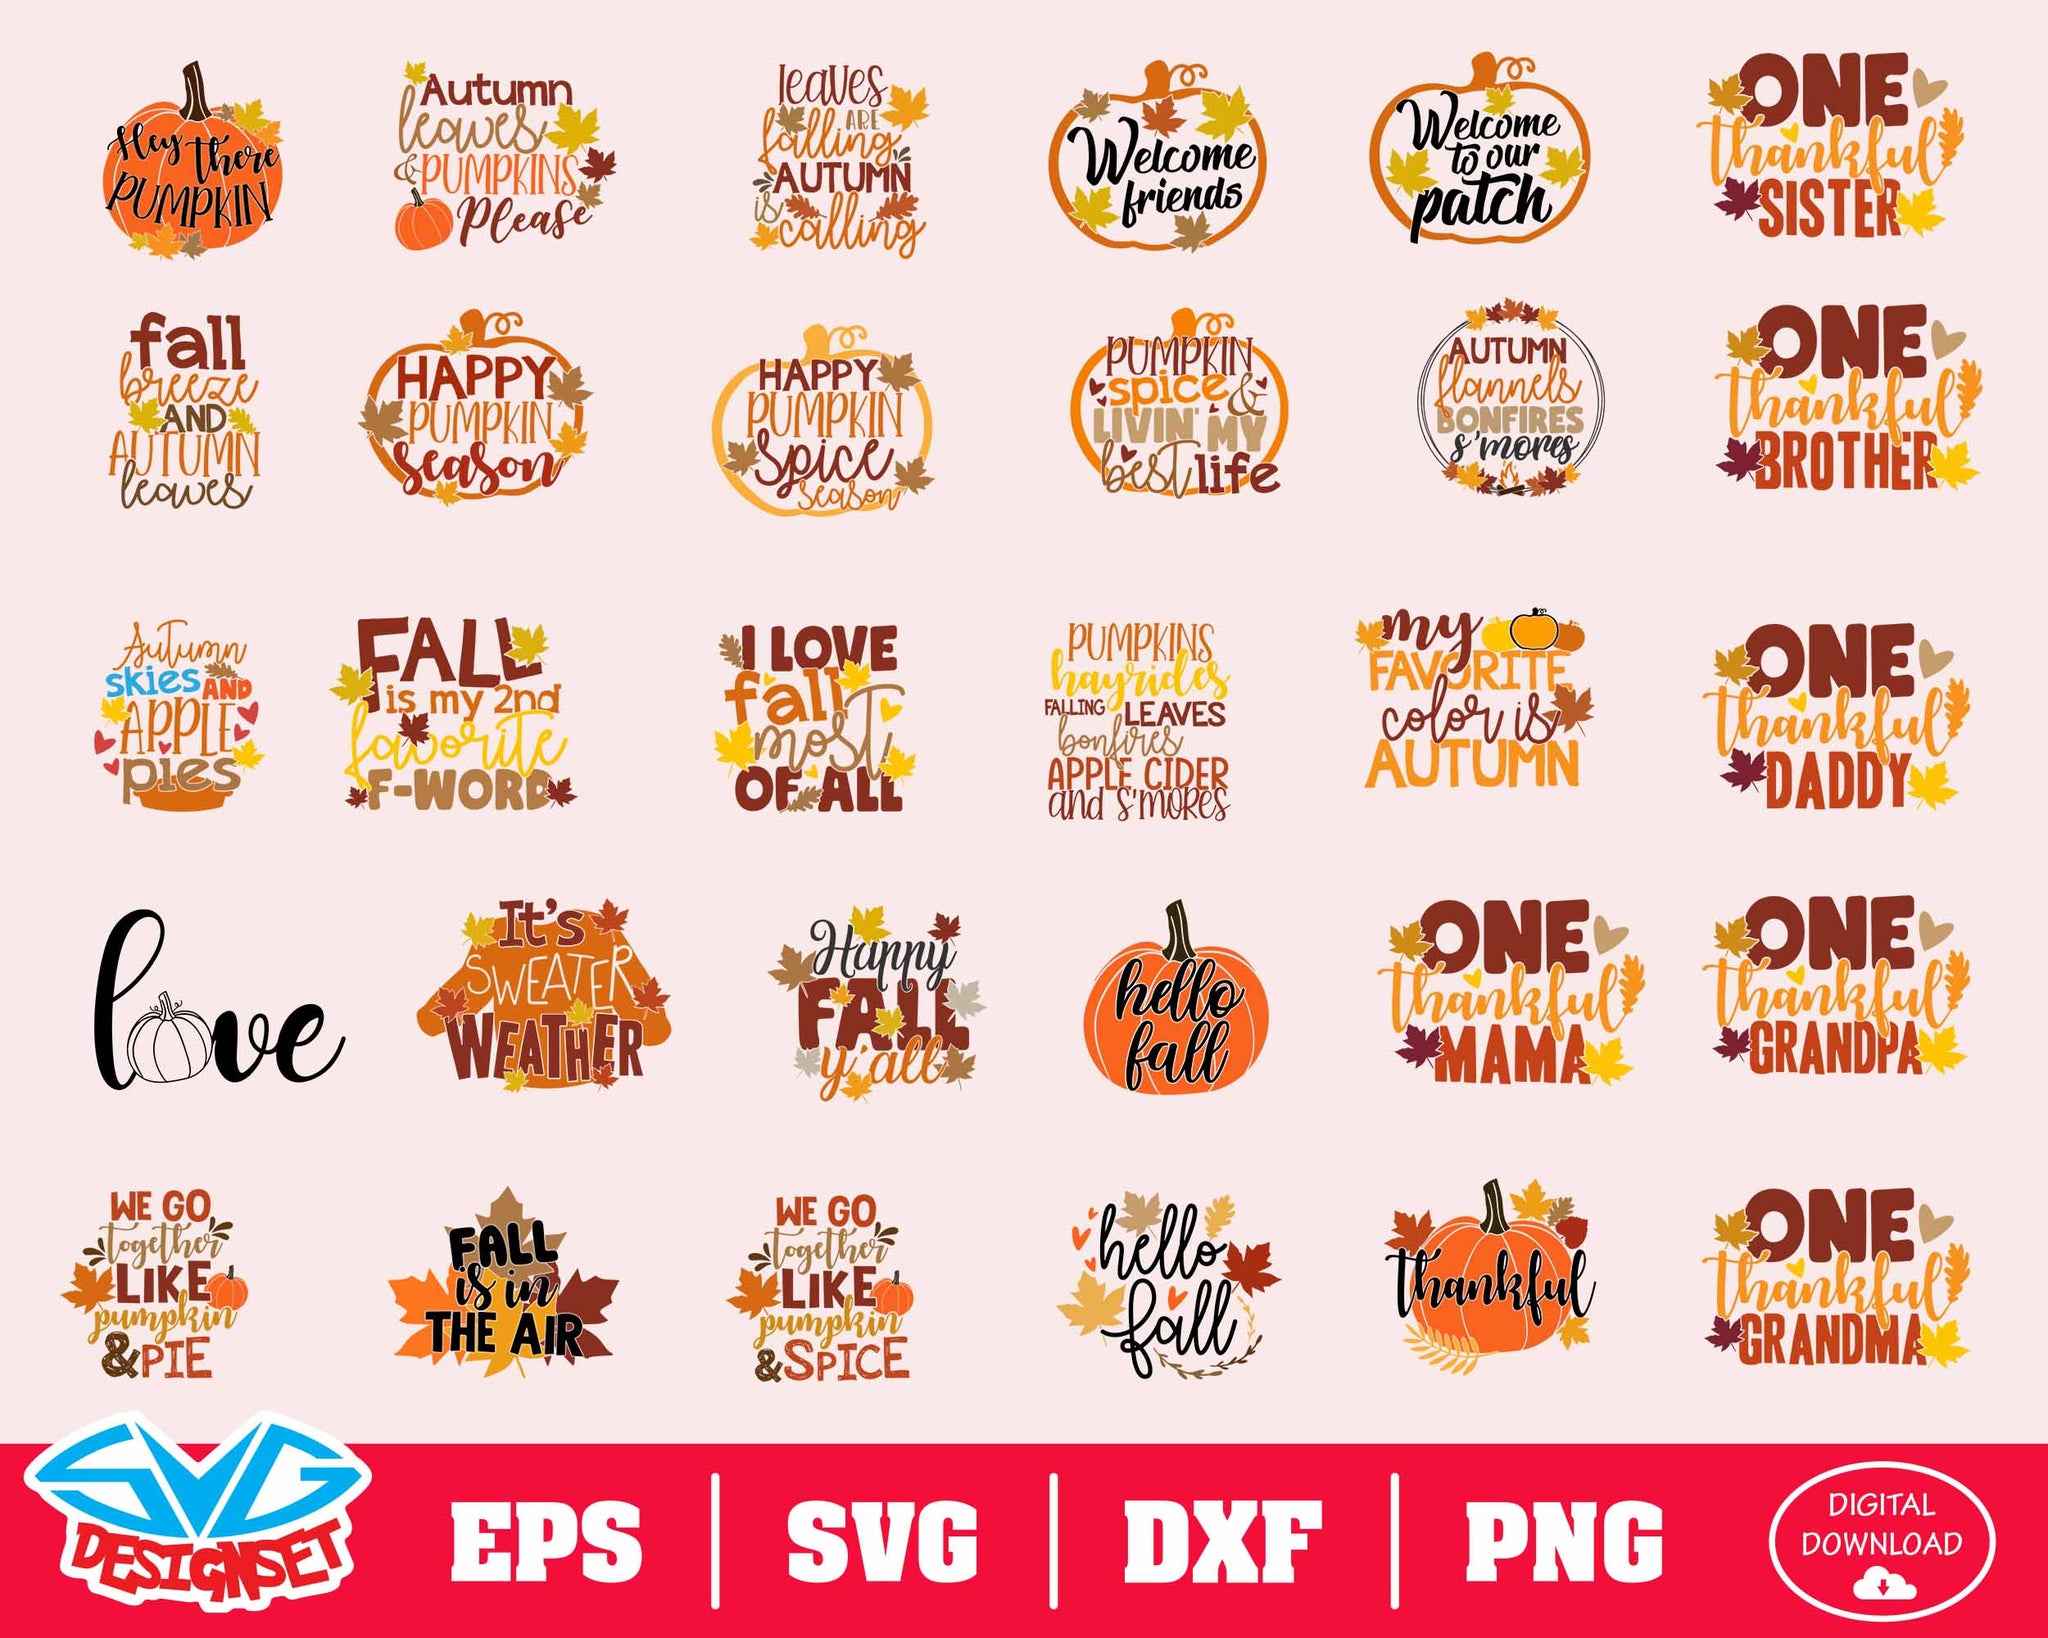 Thanksgiving Svg, Dxf, Eps, Png, Clipart, Silhouette and Cutfiles #8 - SVGDesignSets